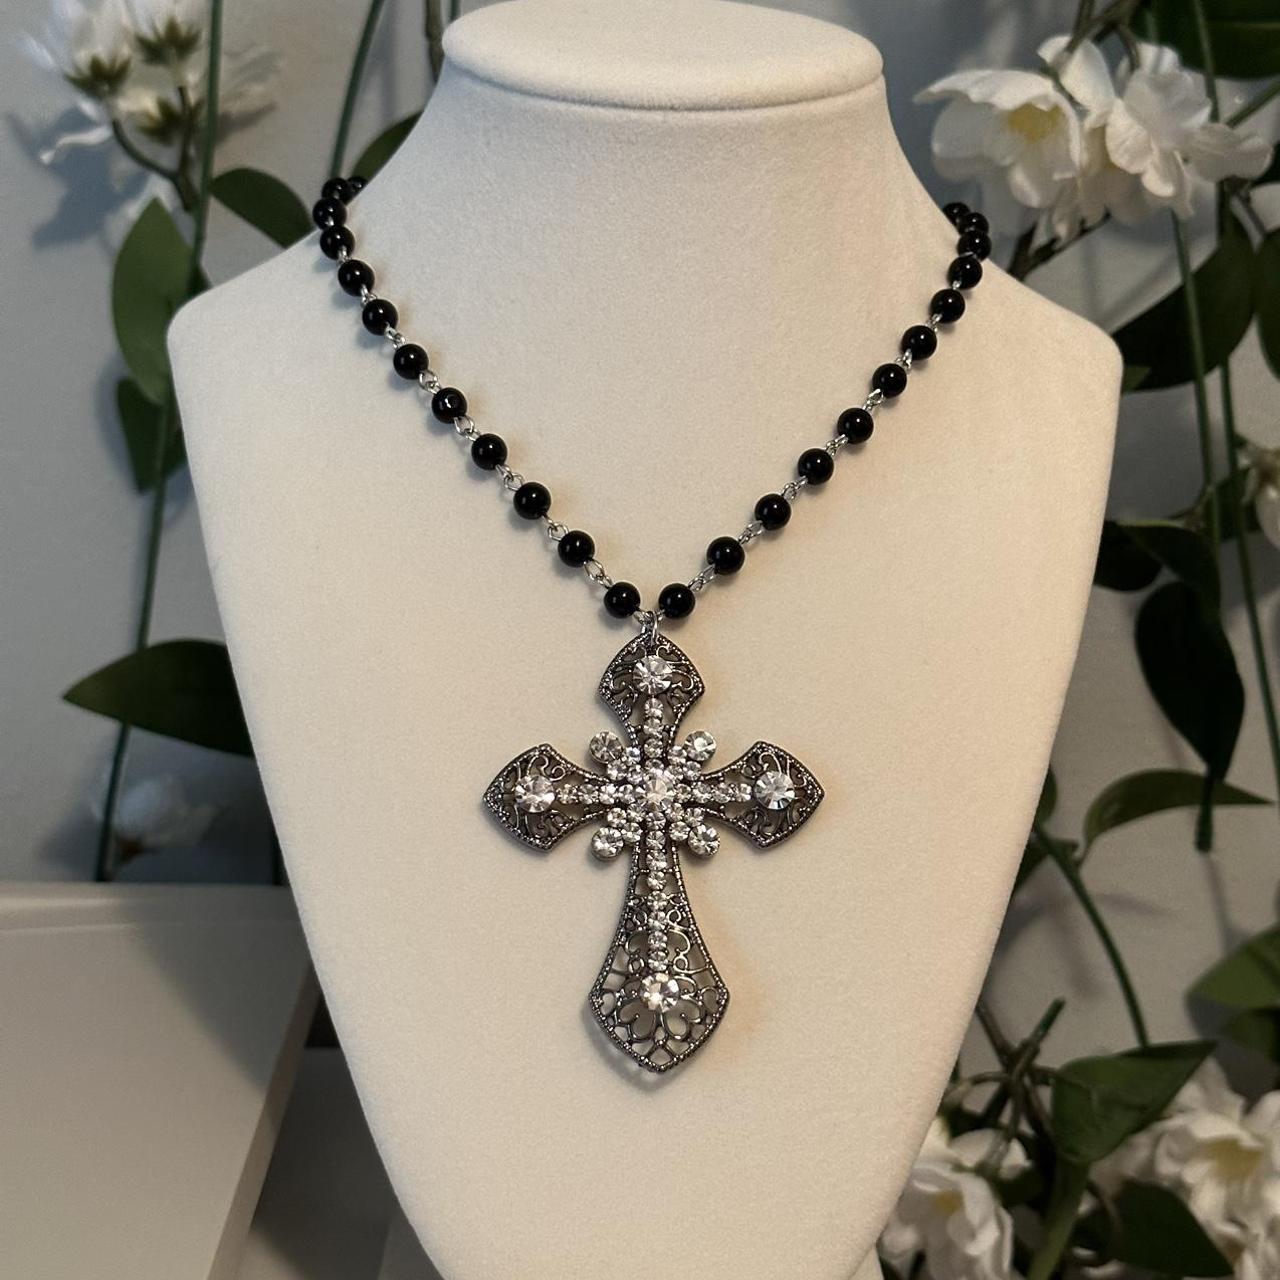 Mens Black Bead Cross Rosary Necklace 14K Gold Chain, Religious Faith  Jewelry For Power Balance From Gojewelry, $99.11 | DHgate.Com